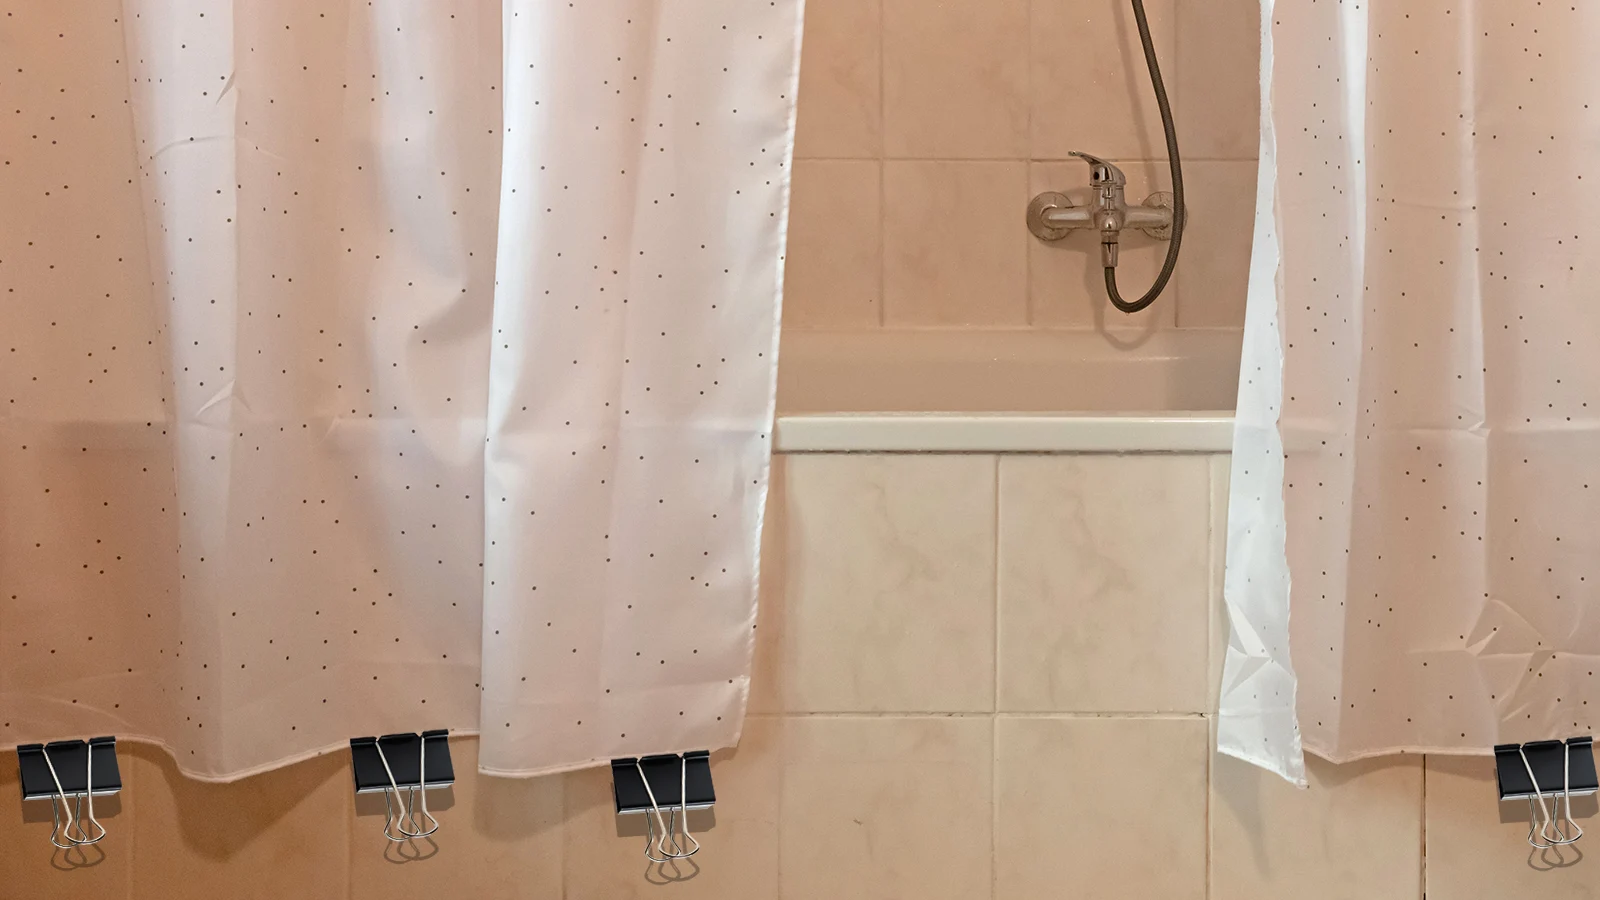 A bathroom with a shower curtain and a tub. Learn how to keep the shower curtain closed for a neat and tidy appearance.